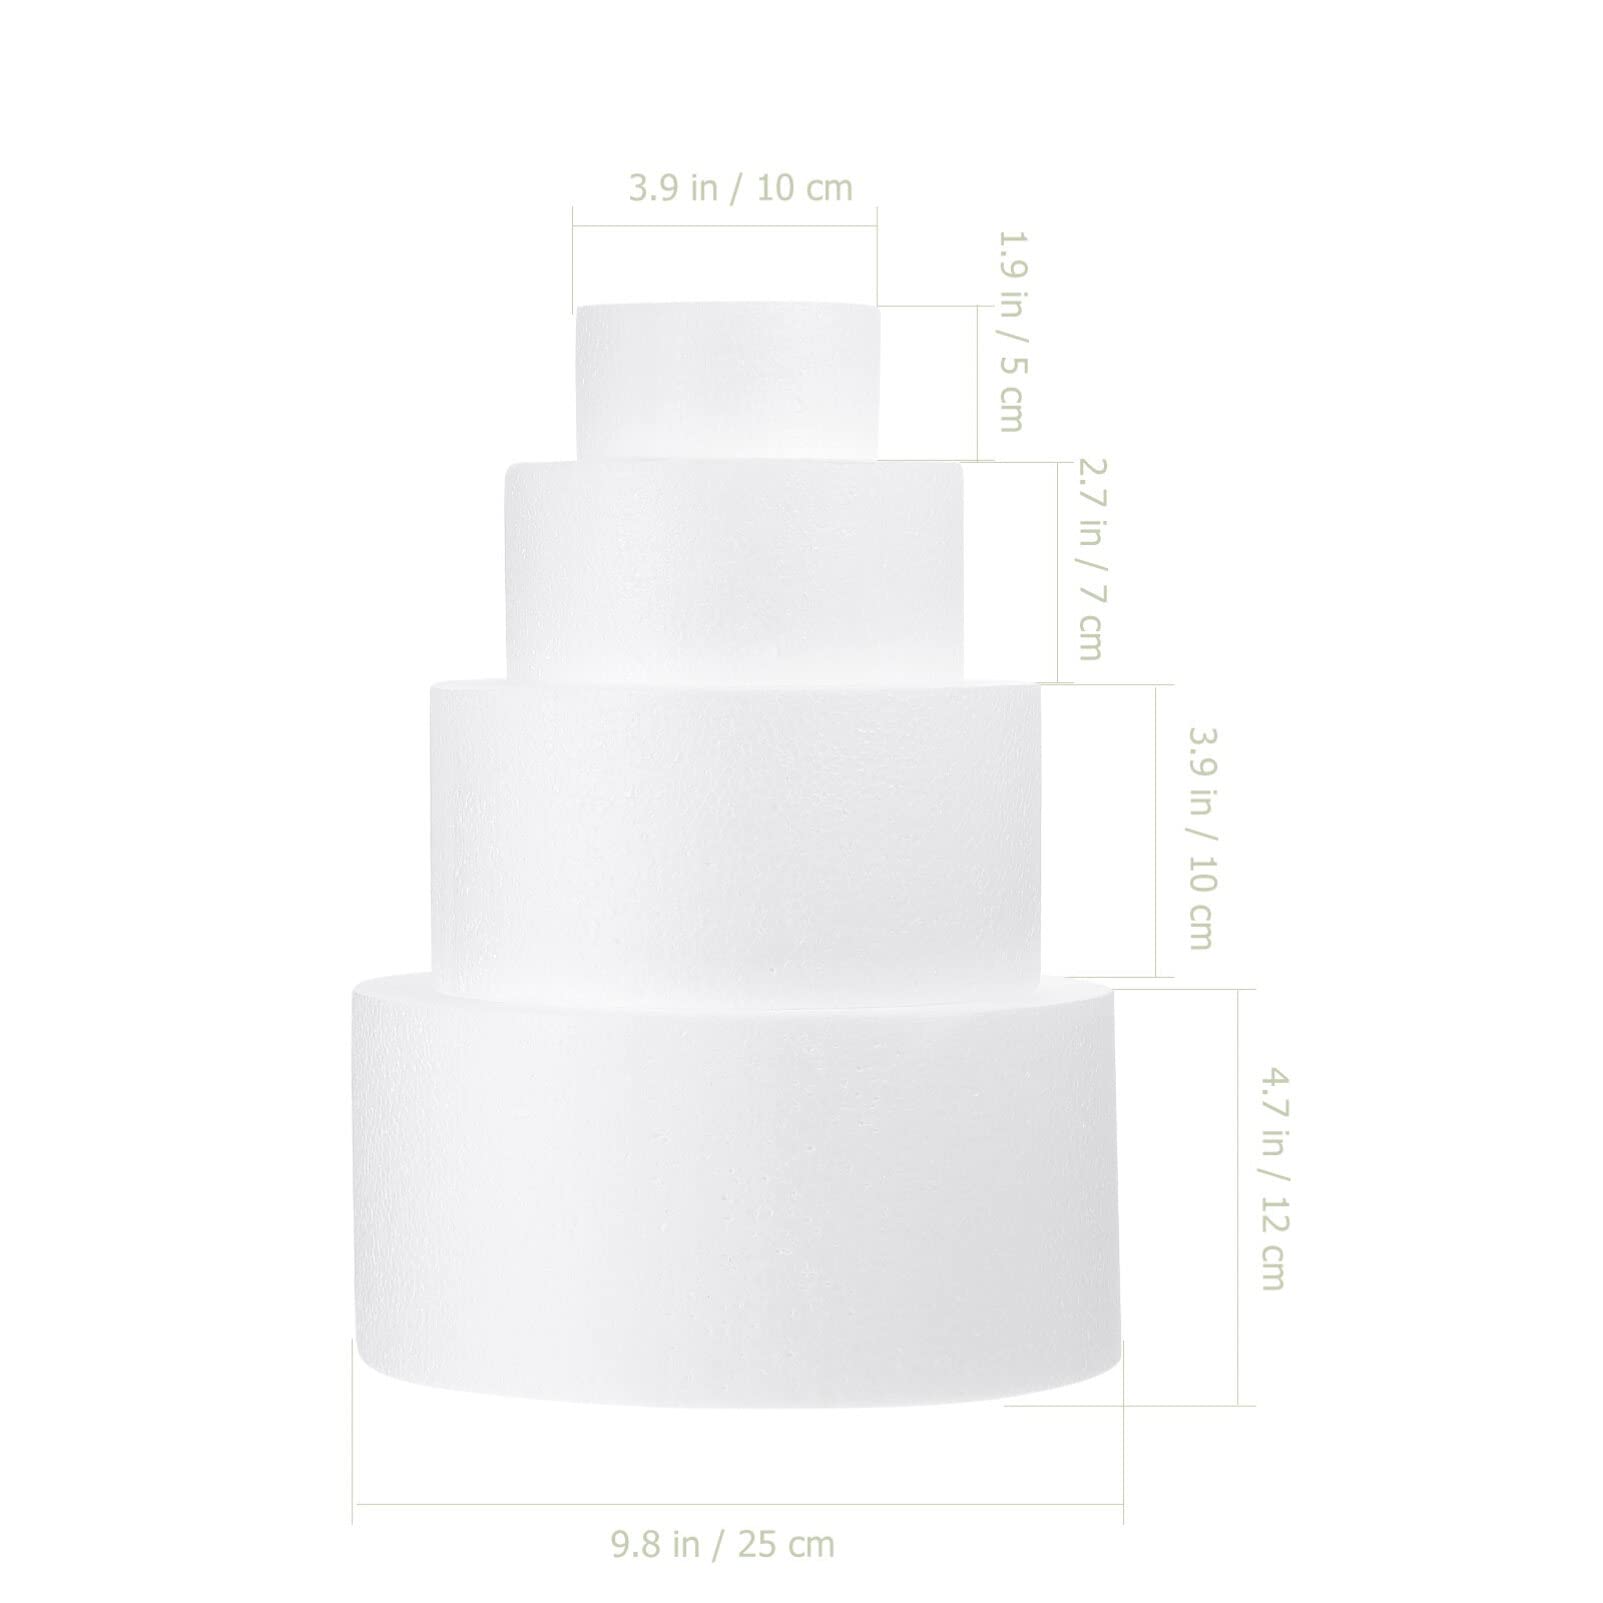 Artificial Cake Round Foam Cake Dummy Set:4pcs Tall Fake Wedding Cake DIY Foam Cake Modelling Party Decoration for Display, Arts and Crafts (6, 8, 10, 12 Inches) Cake Decorating Stand